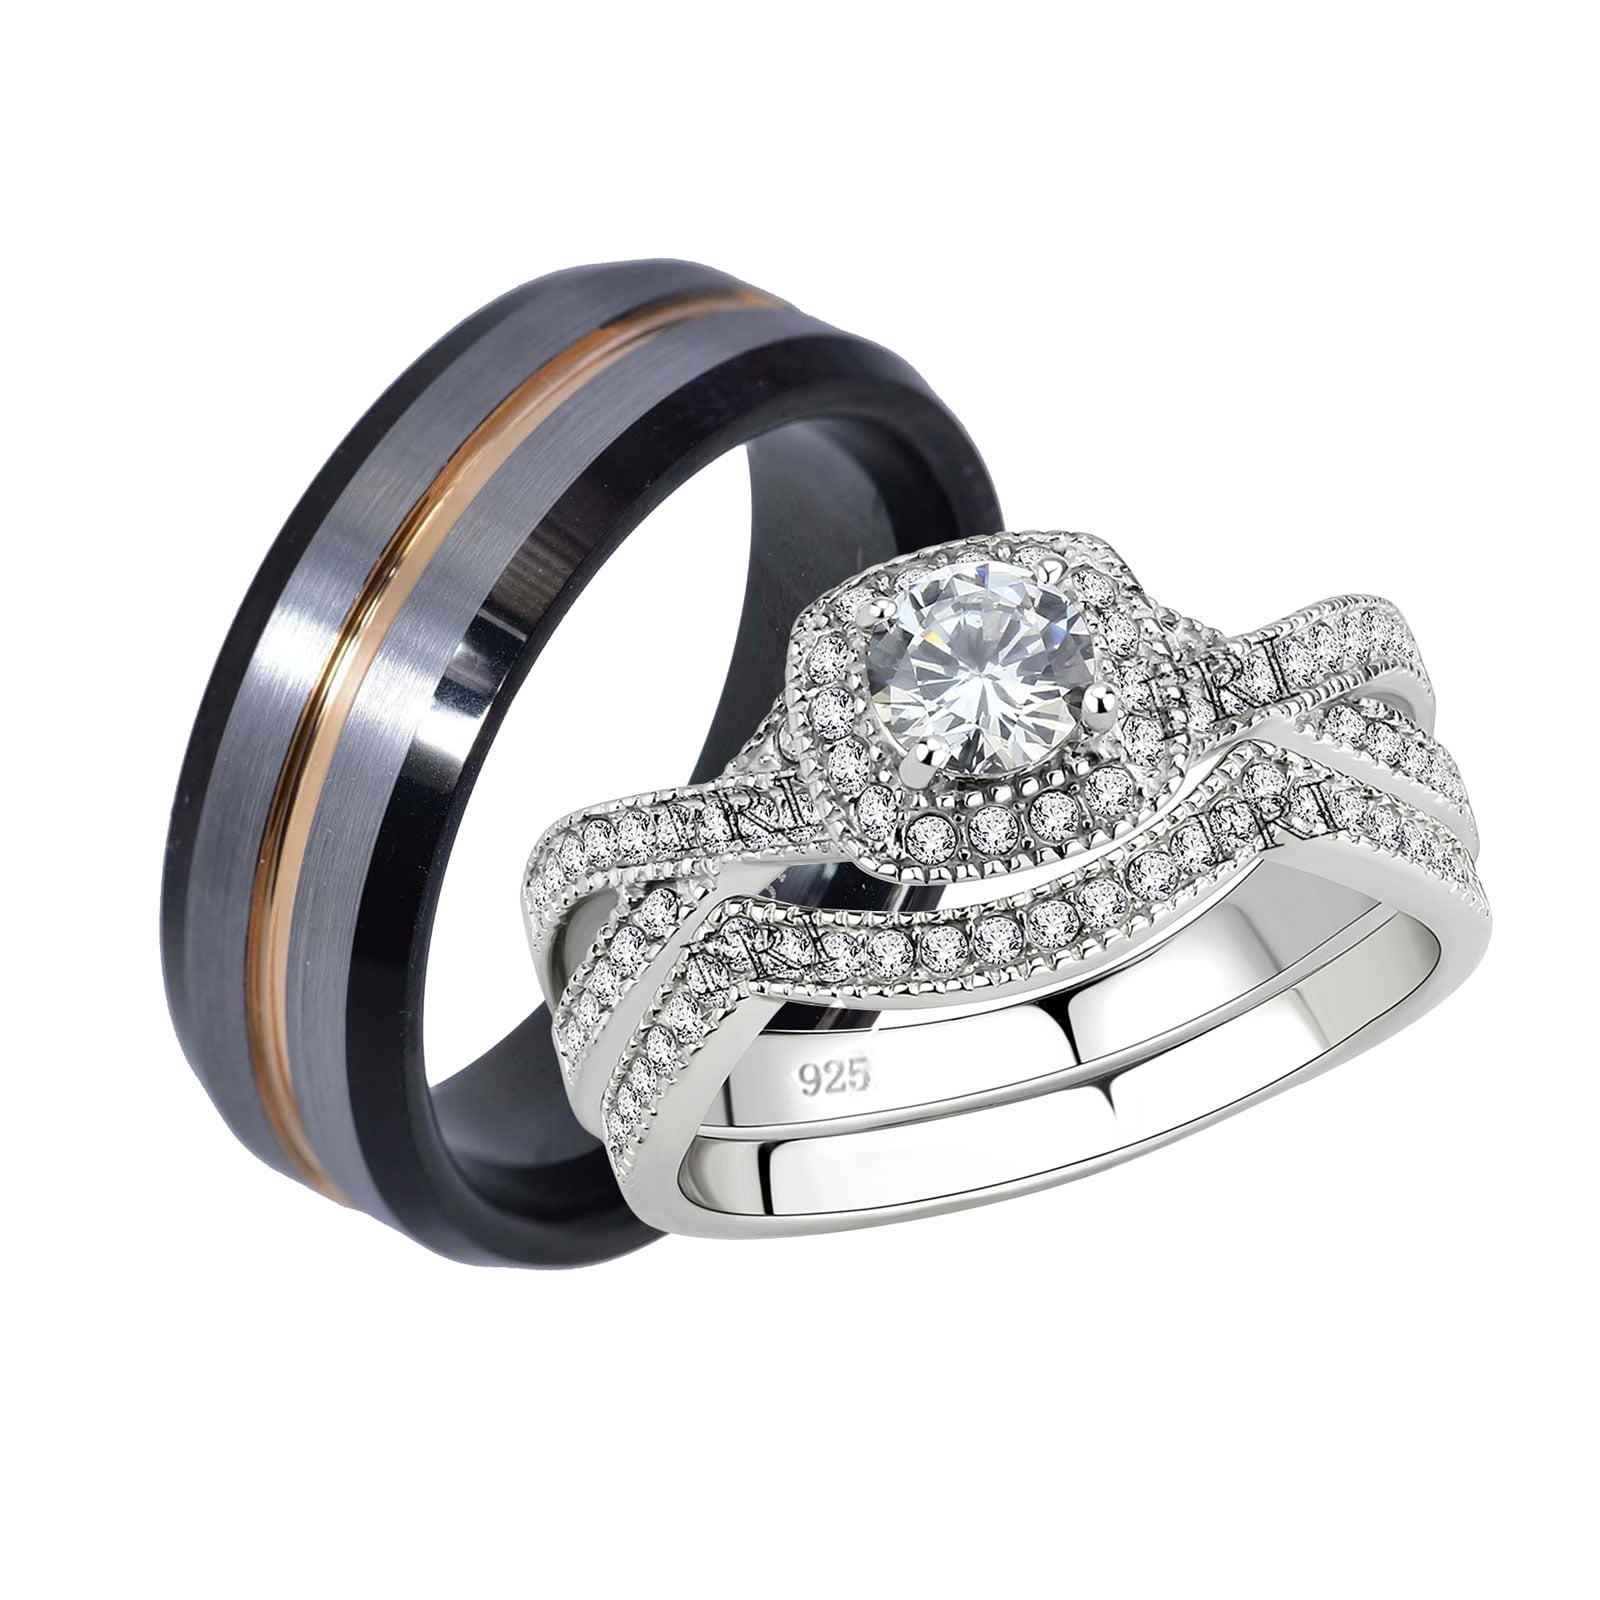 Tungsten 8 mm Band & 925 Sterling Silver Twisted CZ Wedding Anniversary Ring Set 